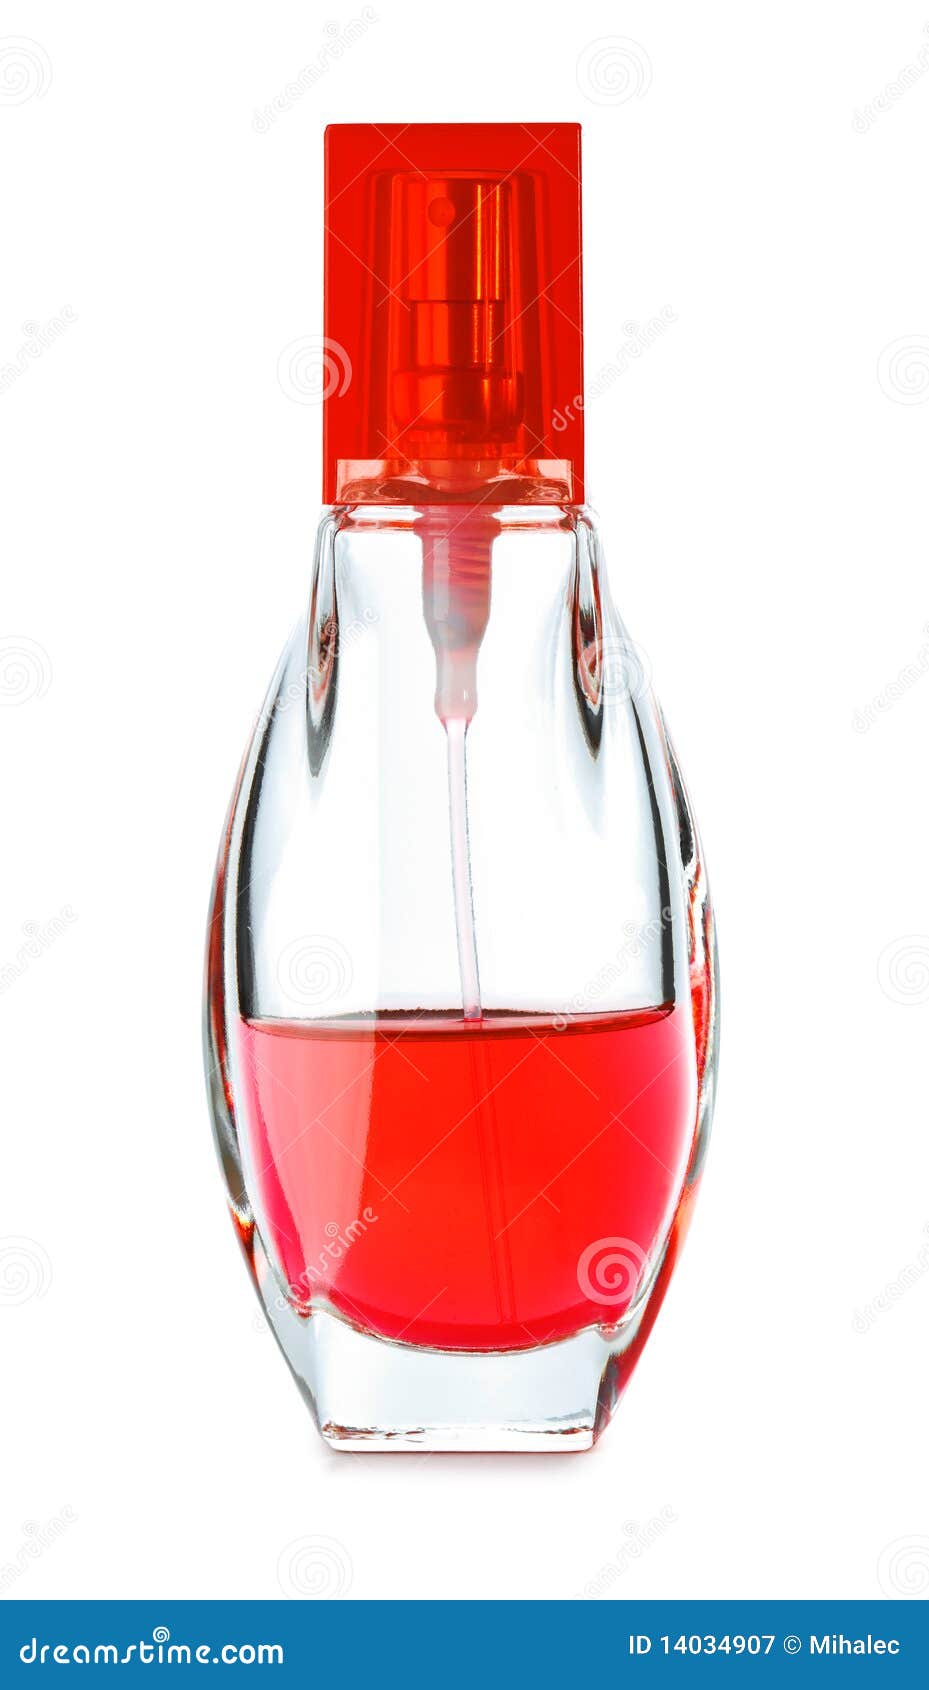 Red Bra and Perfume on White Background Stock Photo - Image of